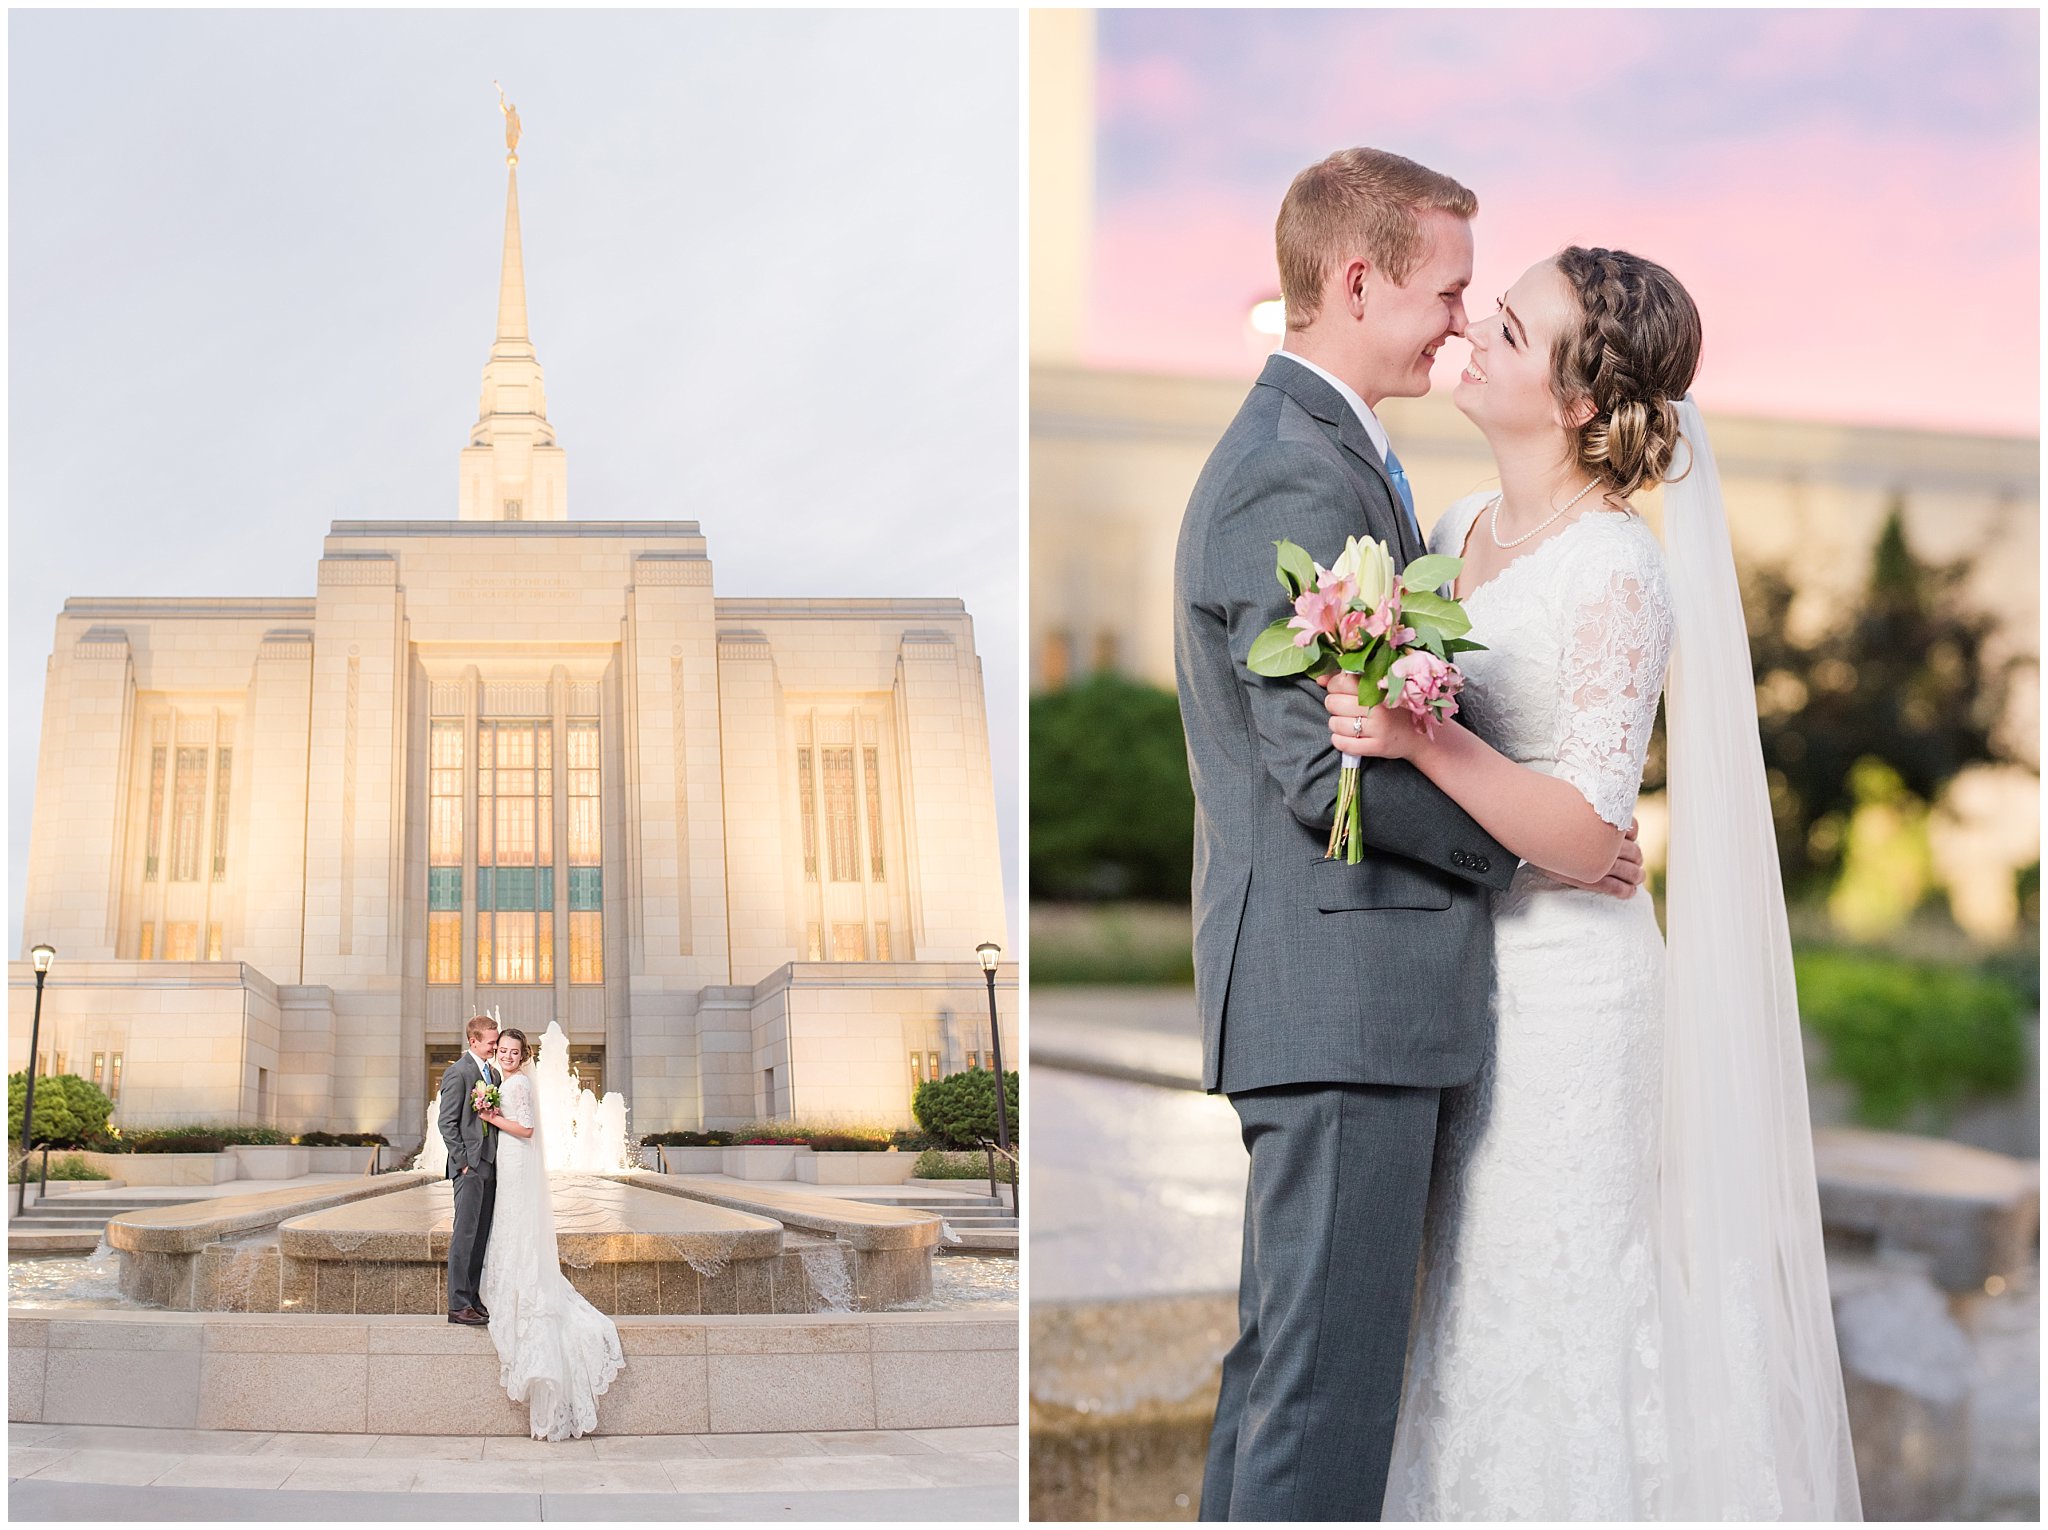 Bride and groom portraits at sunset at the Ogden Temple | Bride in elegant lace dress and veil, groom in grey suit and light blue tie | Ogden Temple Summer Formal Session | Ogden Temple Wedding | Jessie and Dallin Photography